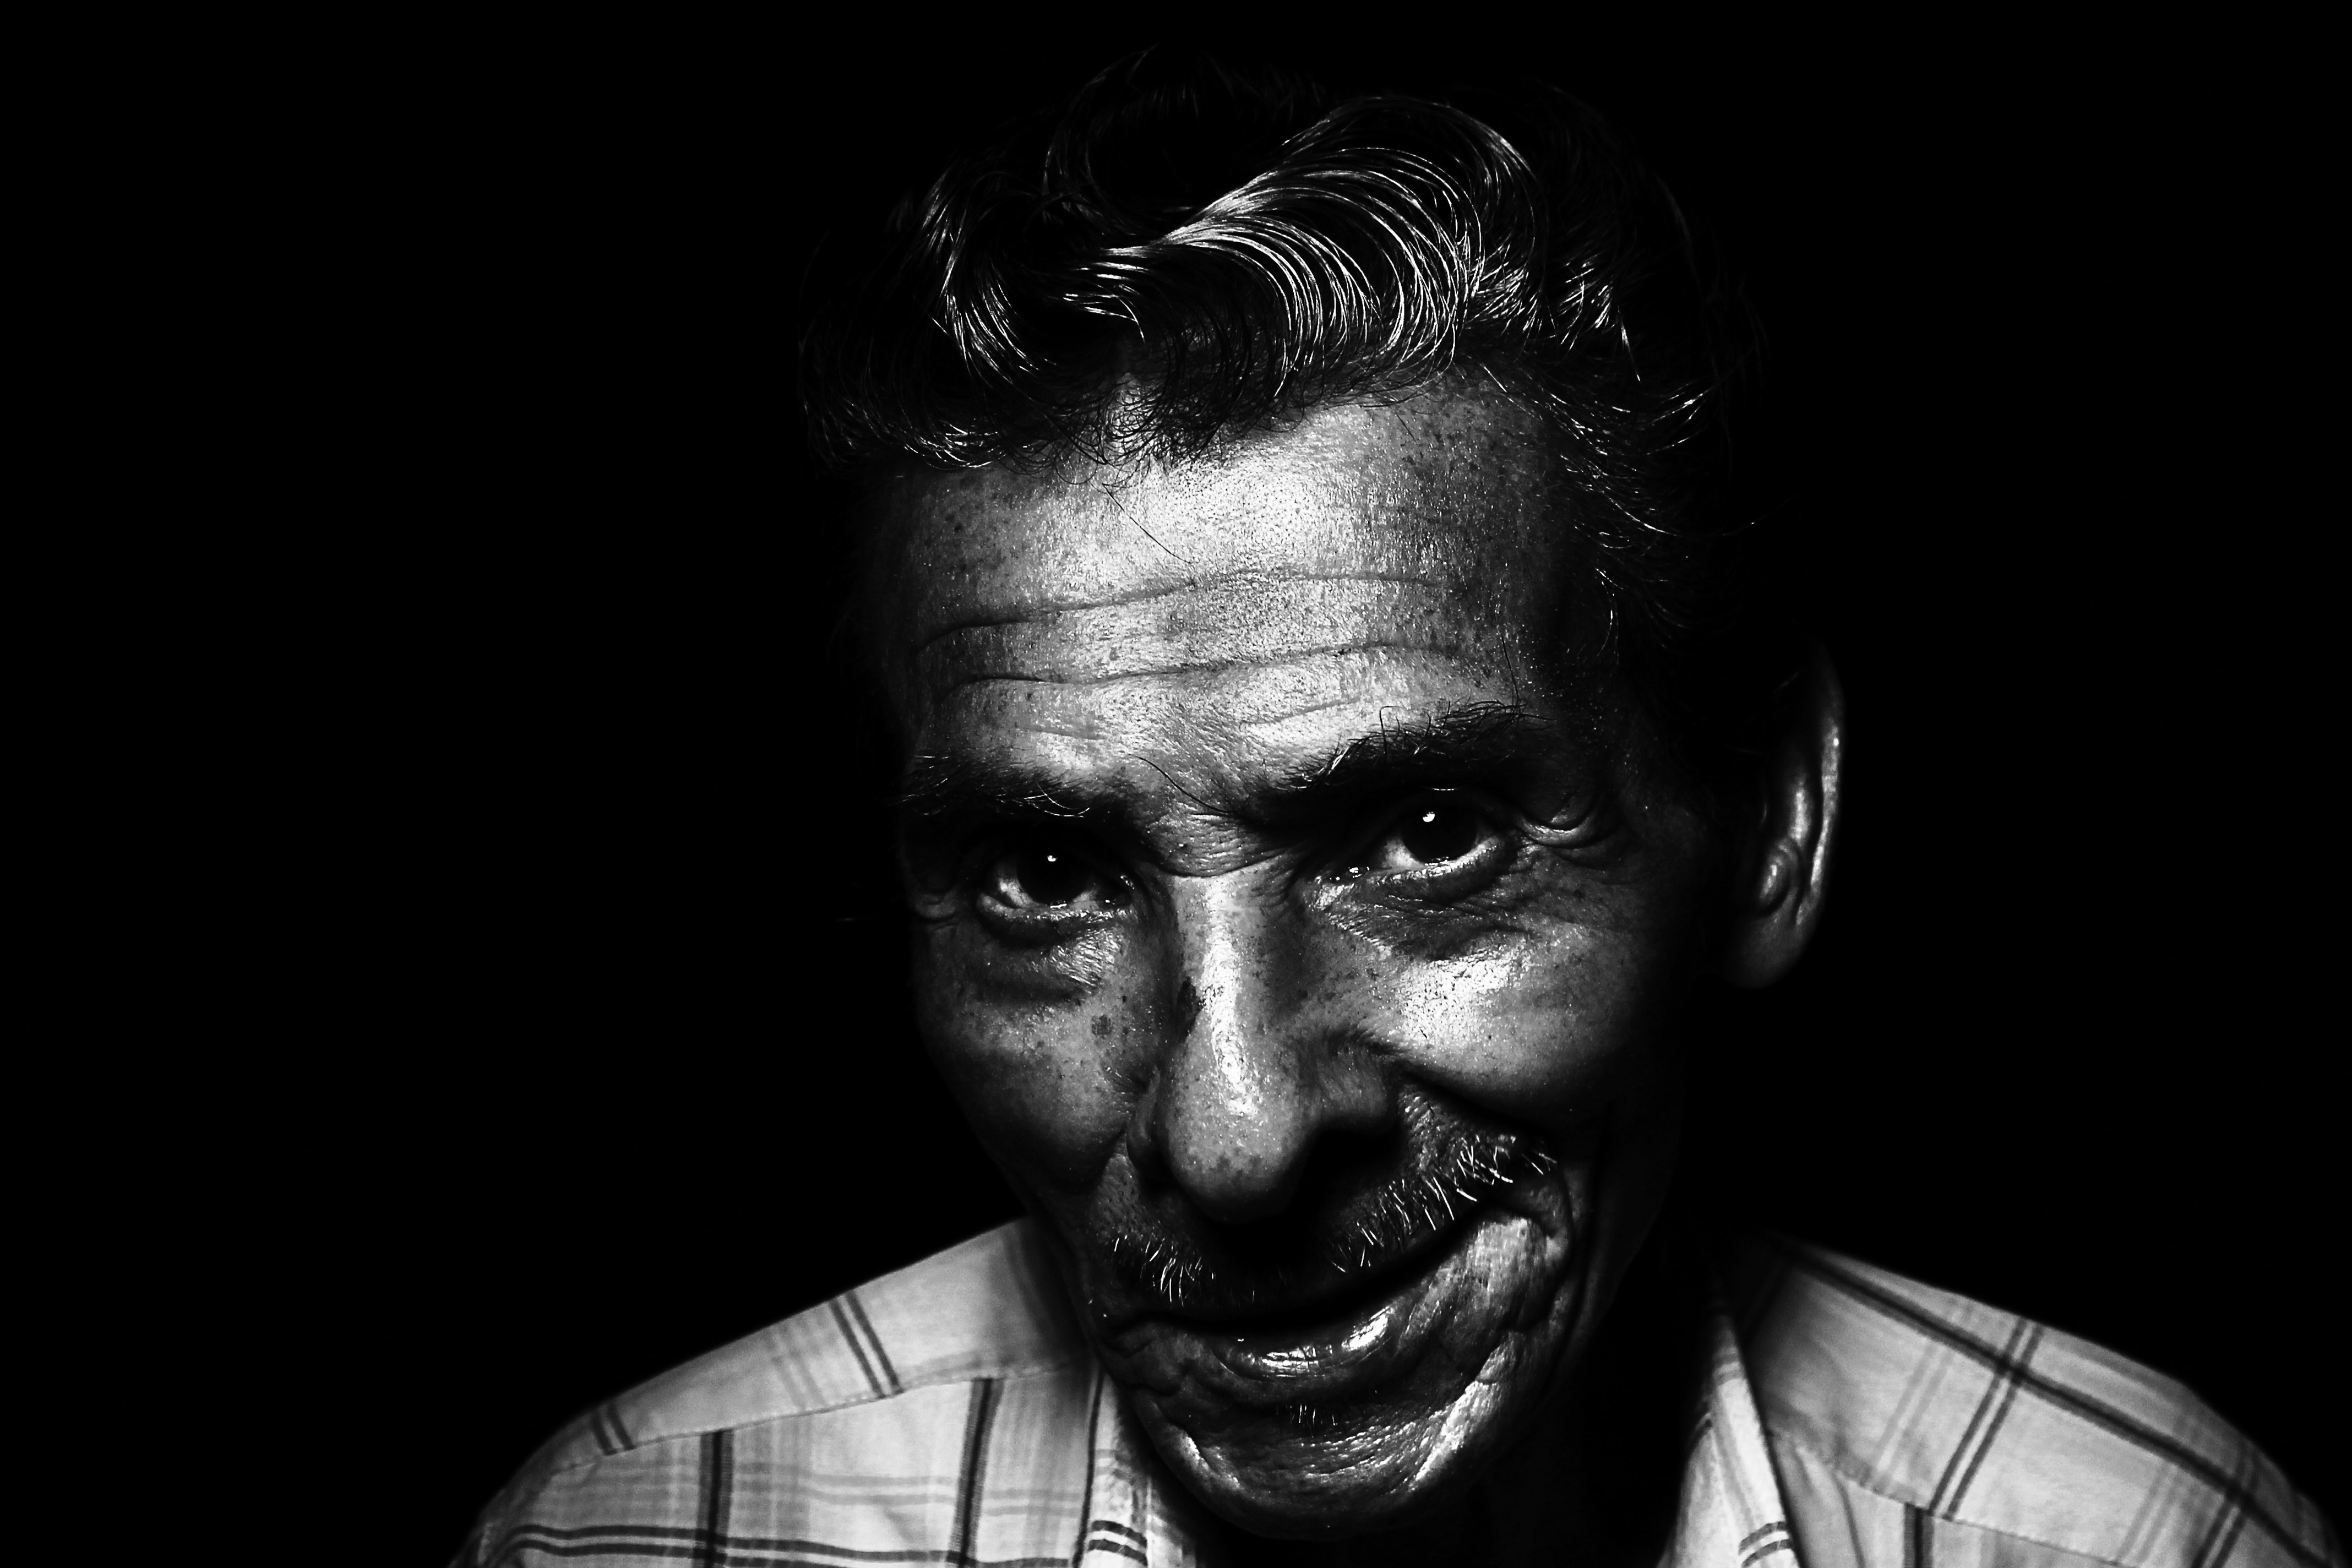 Free photo: Grayscale Photo of Man Smiling - Adult, Grandfather ...